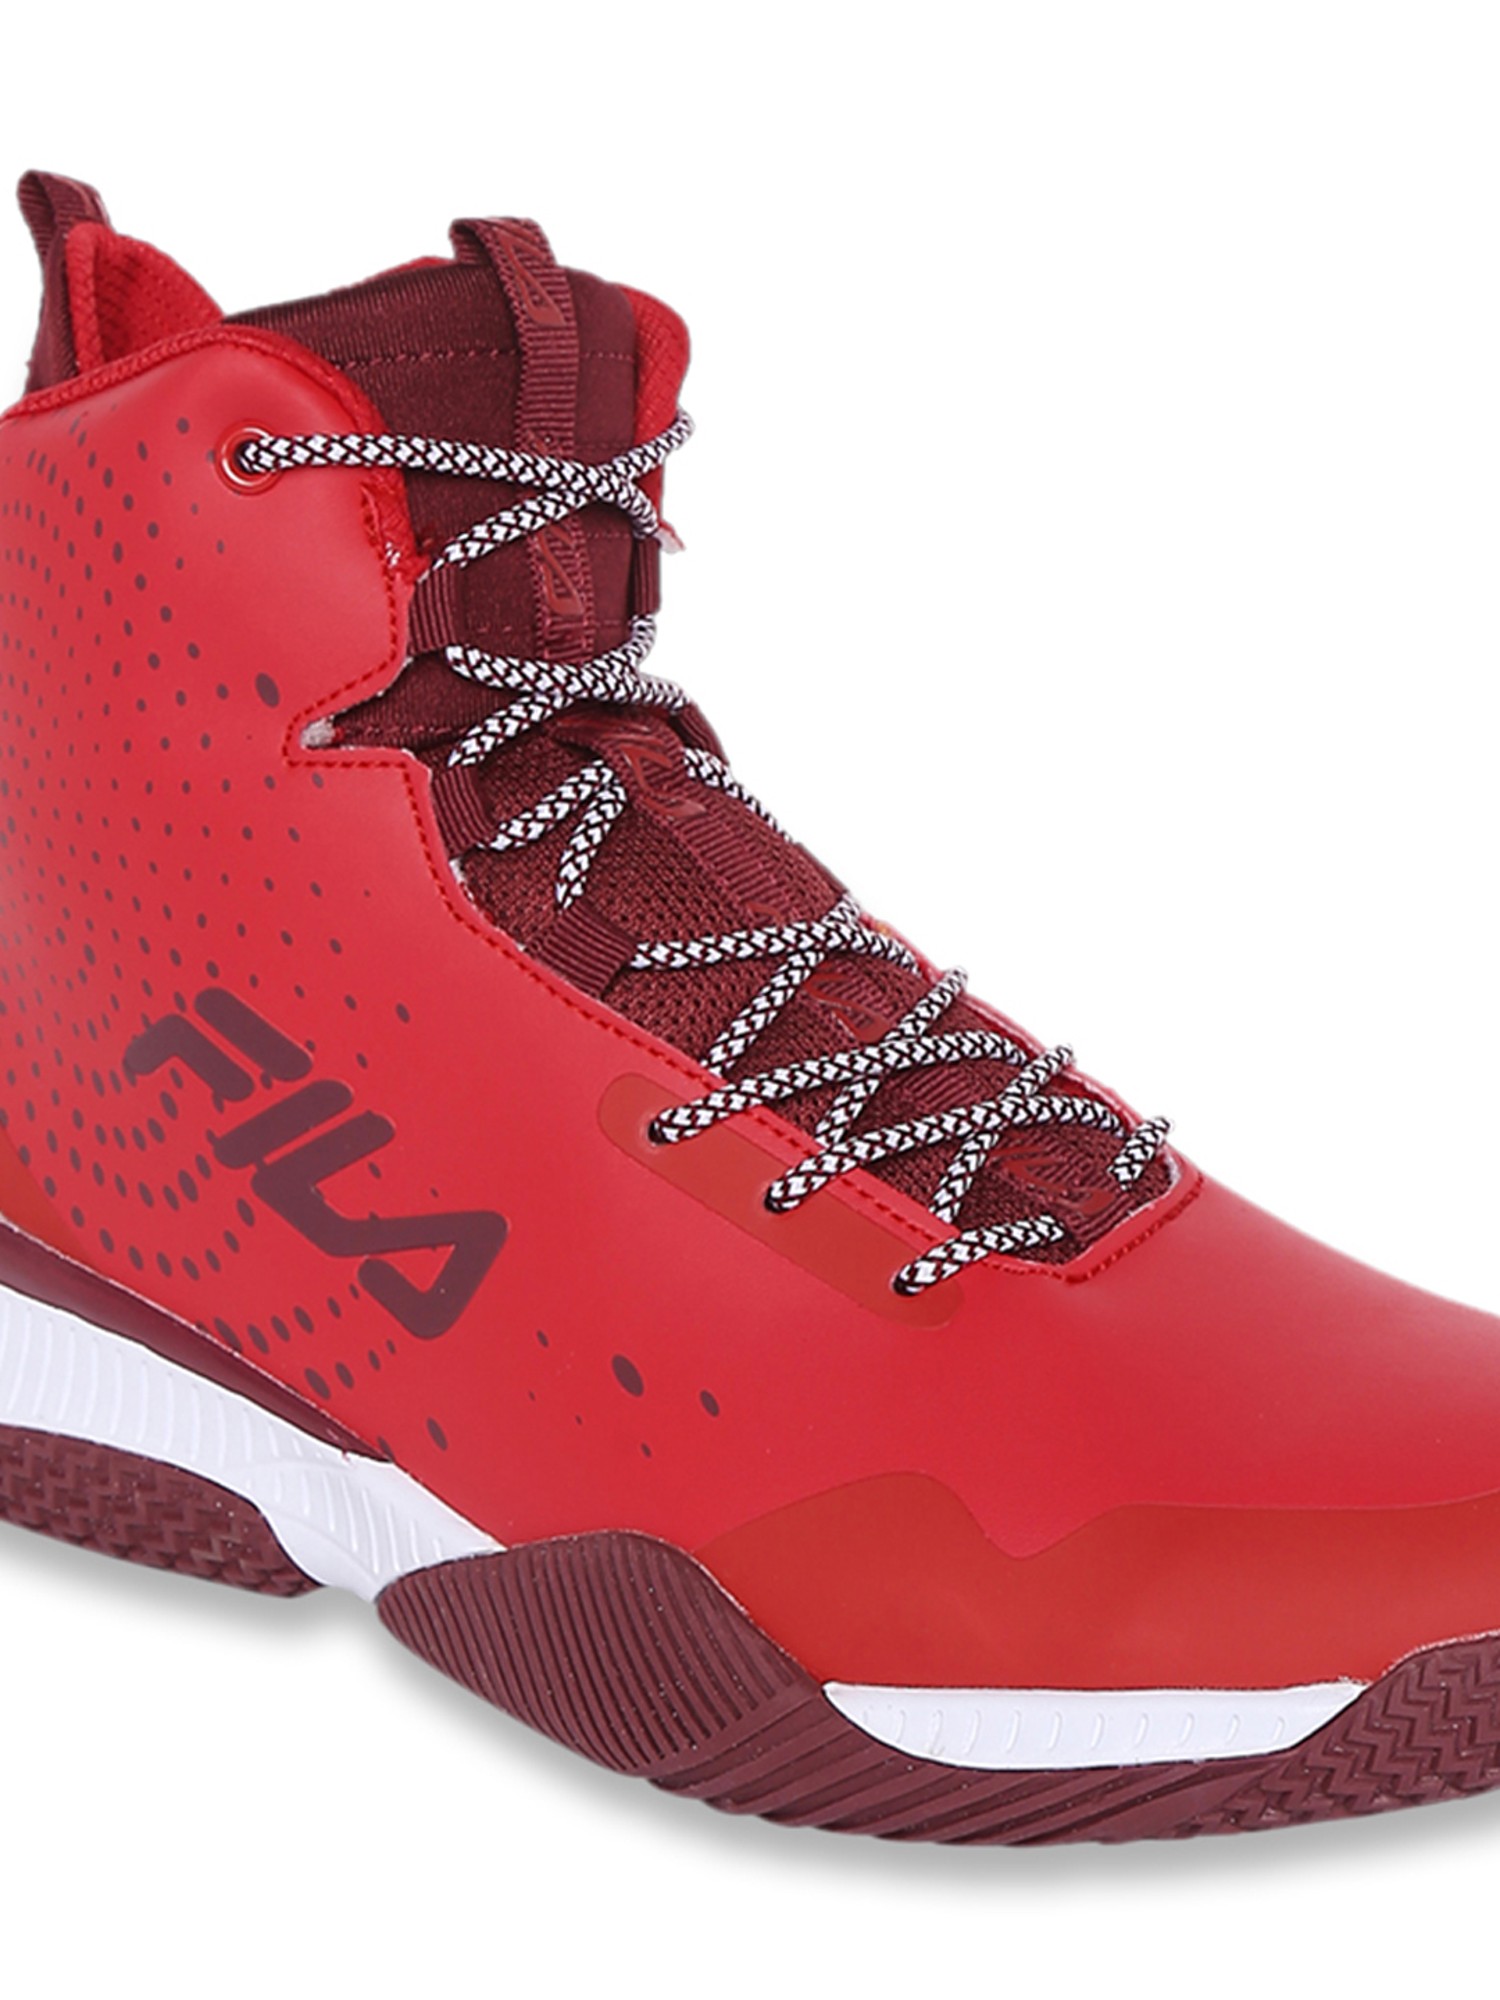 Nivia Appeal 2.0 Badminton Non Marking Shoes (Red) – Jalandhar Style